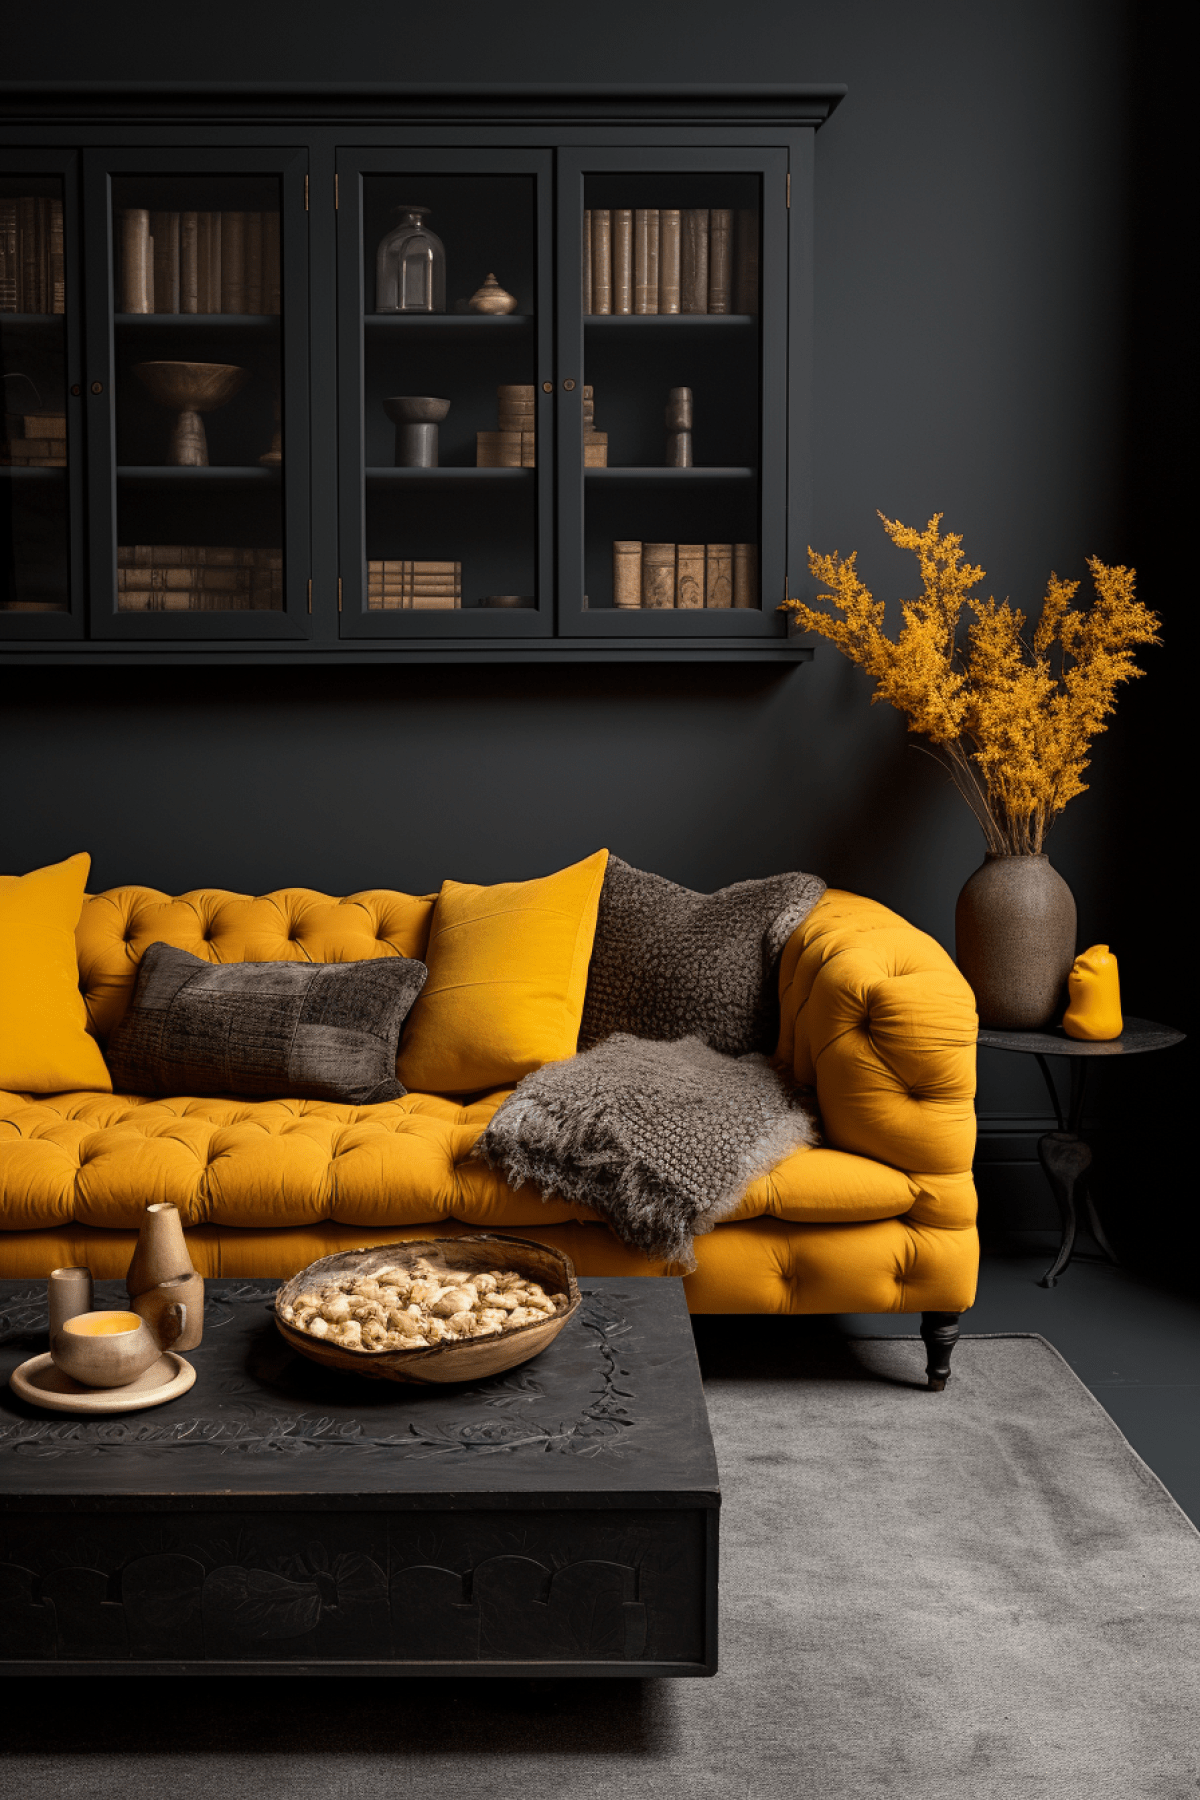 How to make your sofa room best